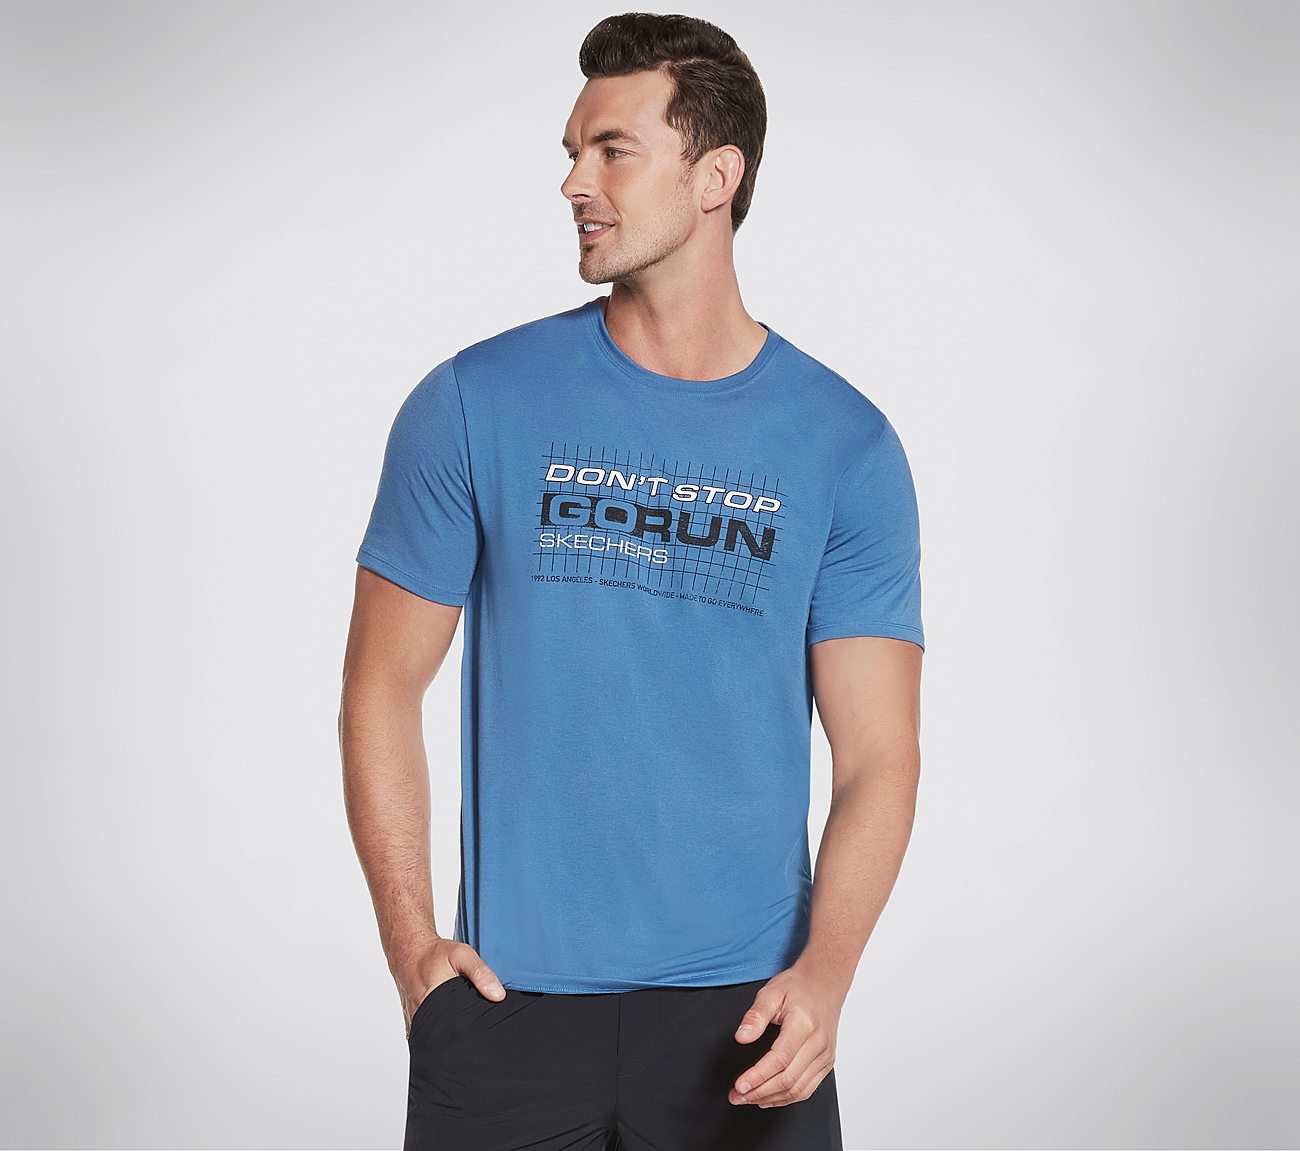 DONT STOP GO RUN TEE, BLUE Apparel Lateral View